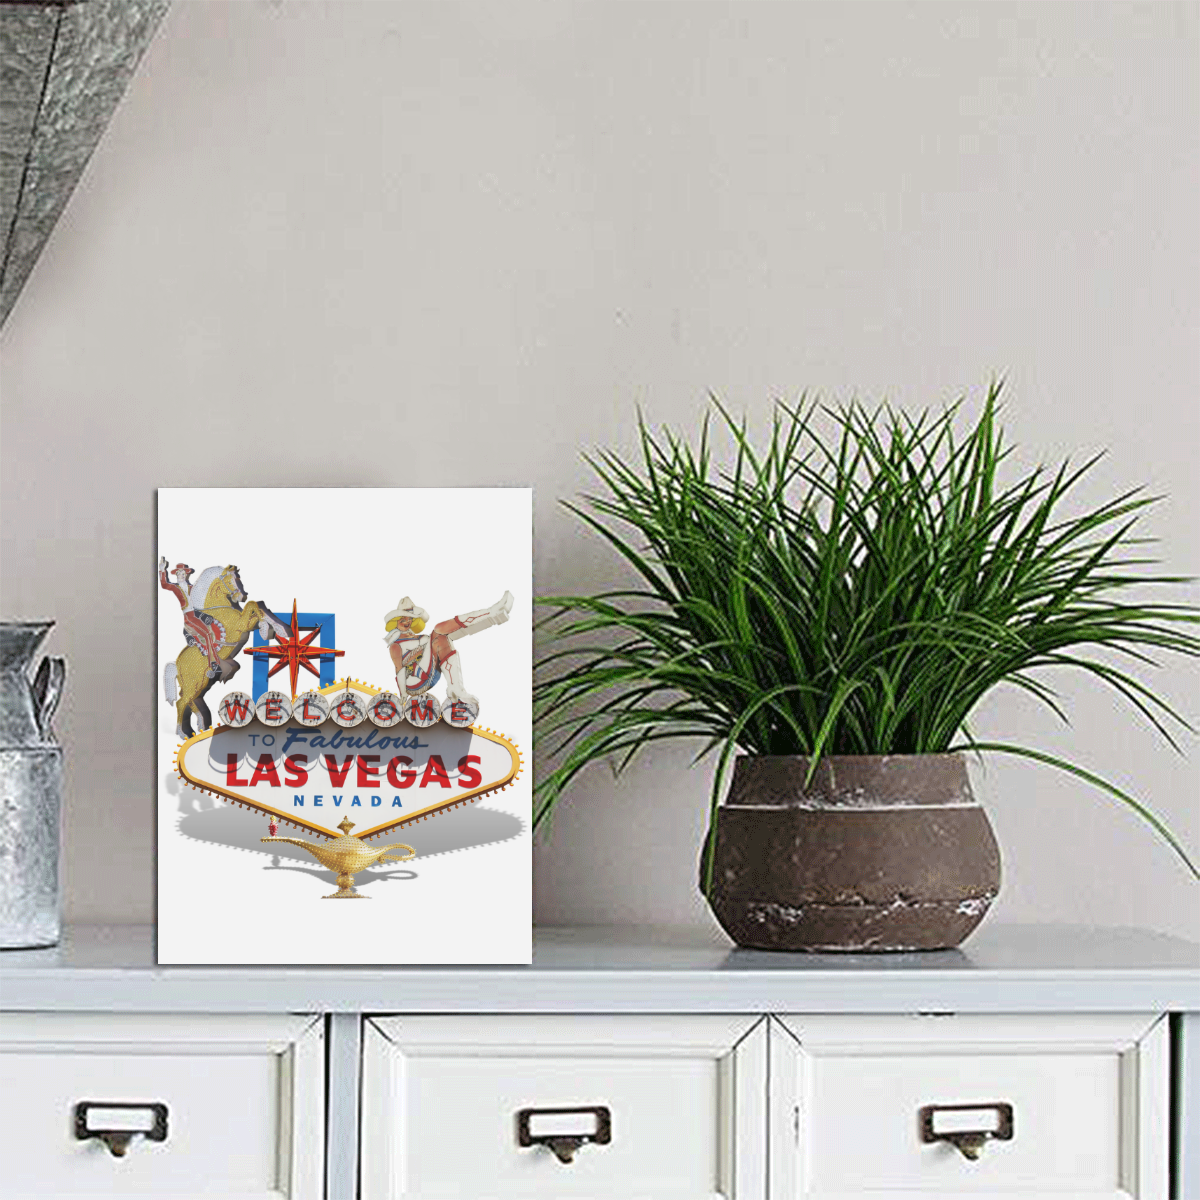 Las Vegas Welcome Sign Photo Panel for Tabletop Display 6"x8"